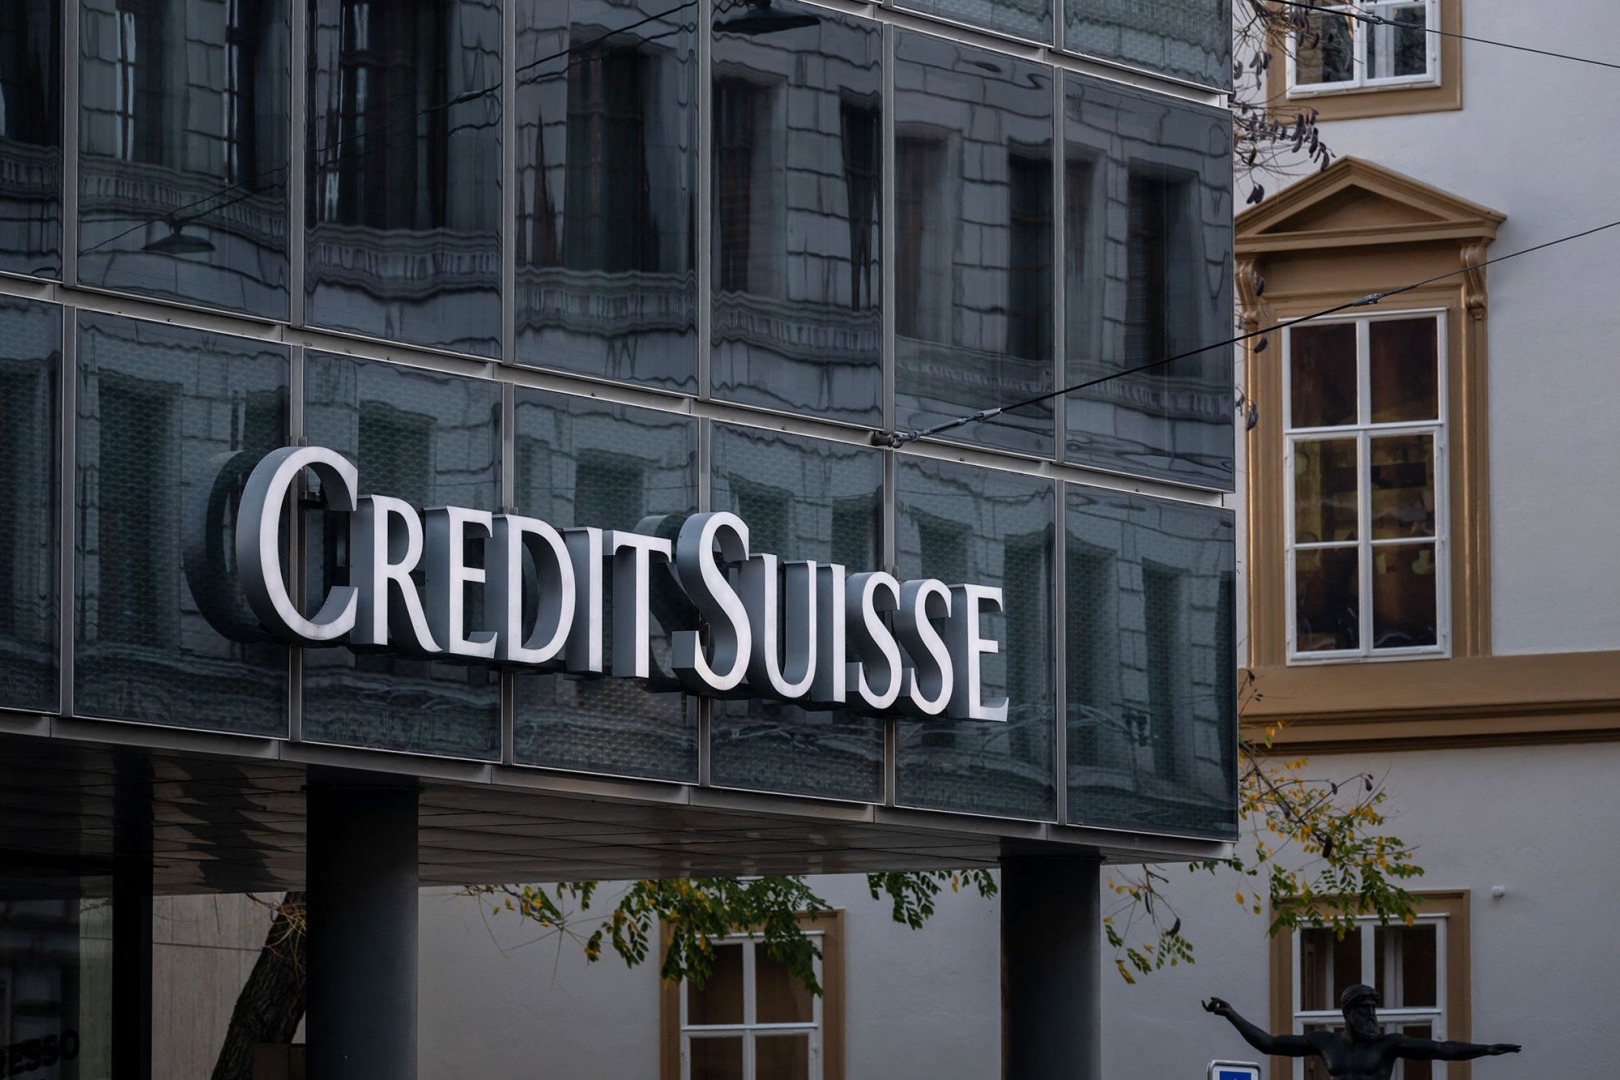 Credit Suisse Plummets as SVB Fallout Highlights Risks within Banking Sector